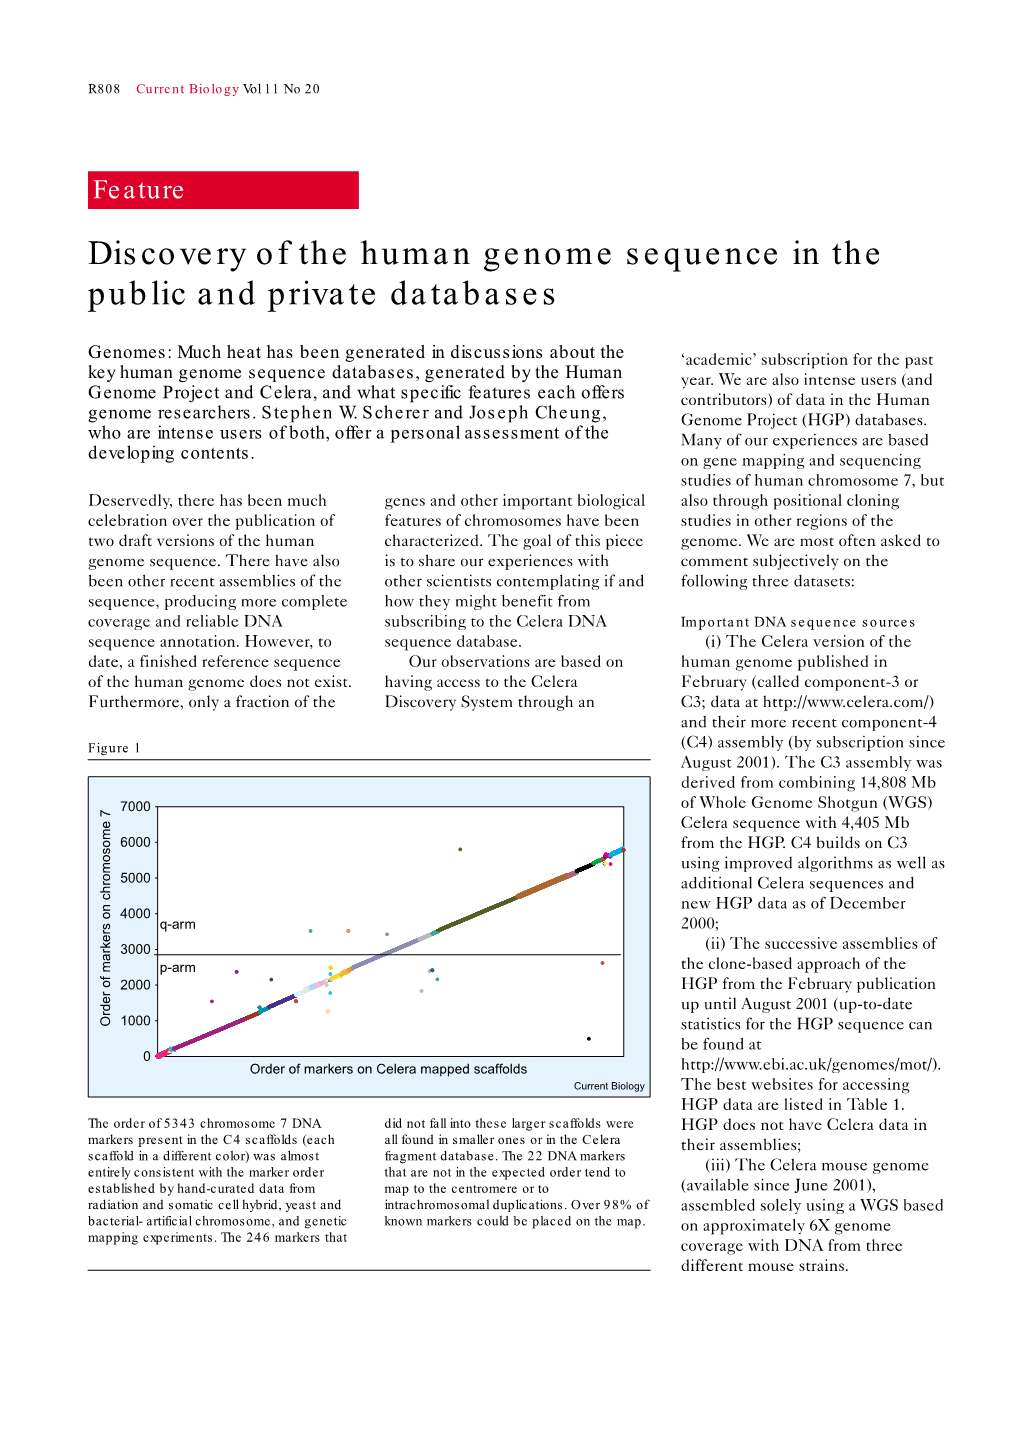 Discovery of the Human Genome Sequence in the Public and Private Databases